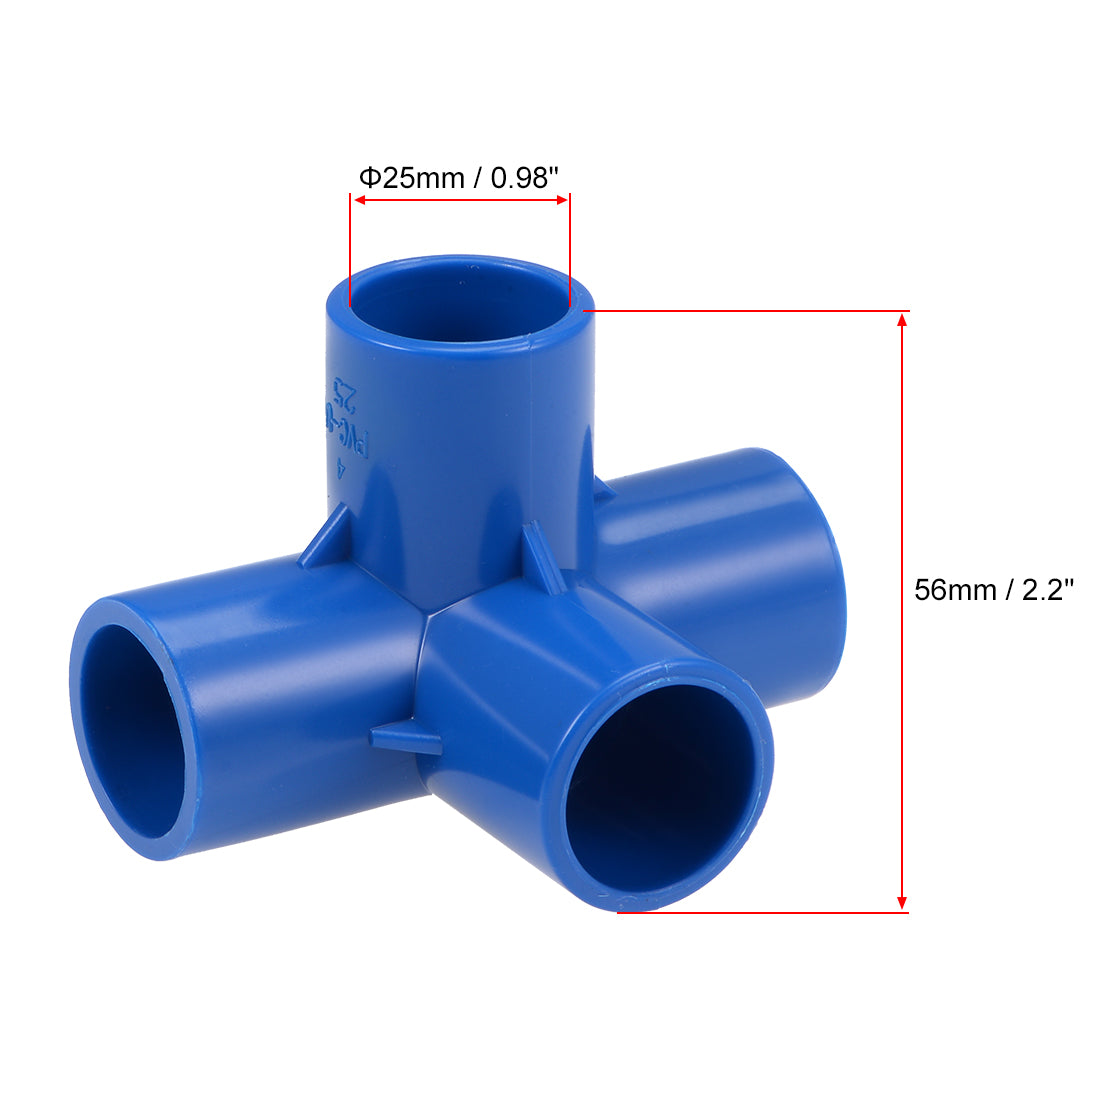 uxcell Uxcell 4 Way 25mm Tee Metric PVC Fitting Elbow - PVC Furniture - PVC Elbow Fittings Blue 5Pcs